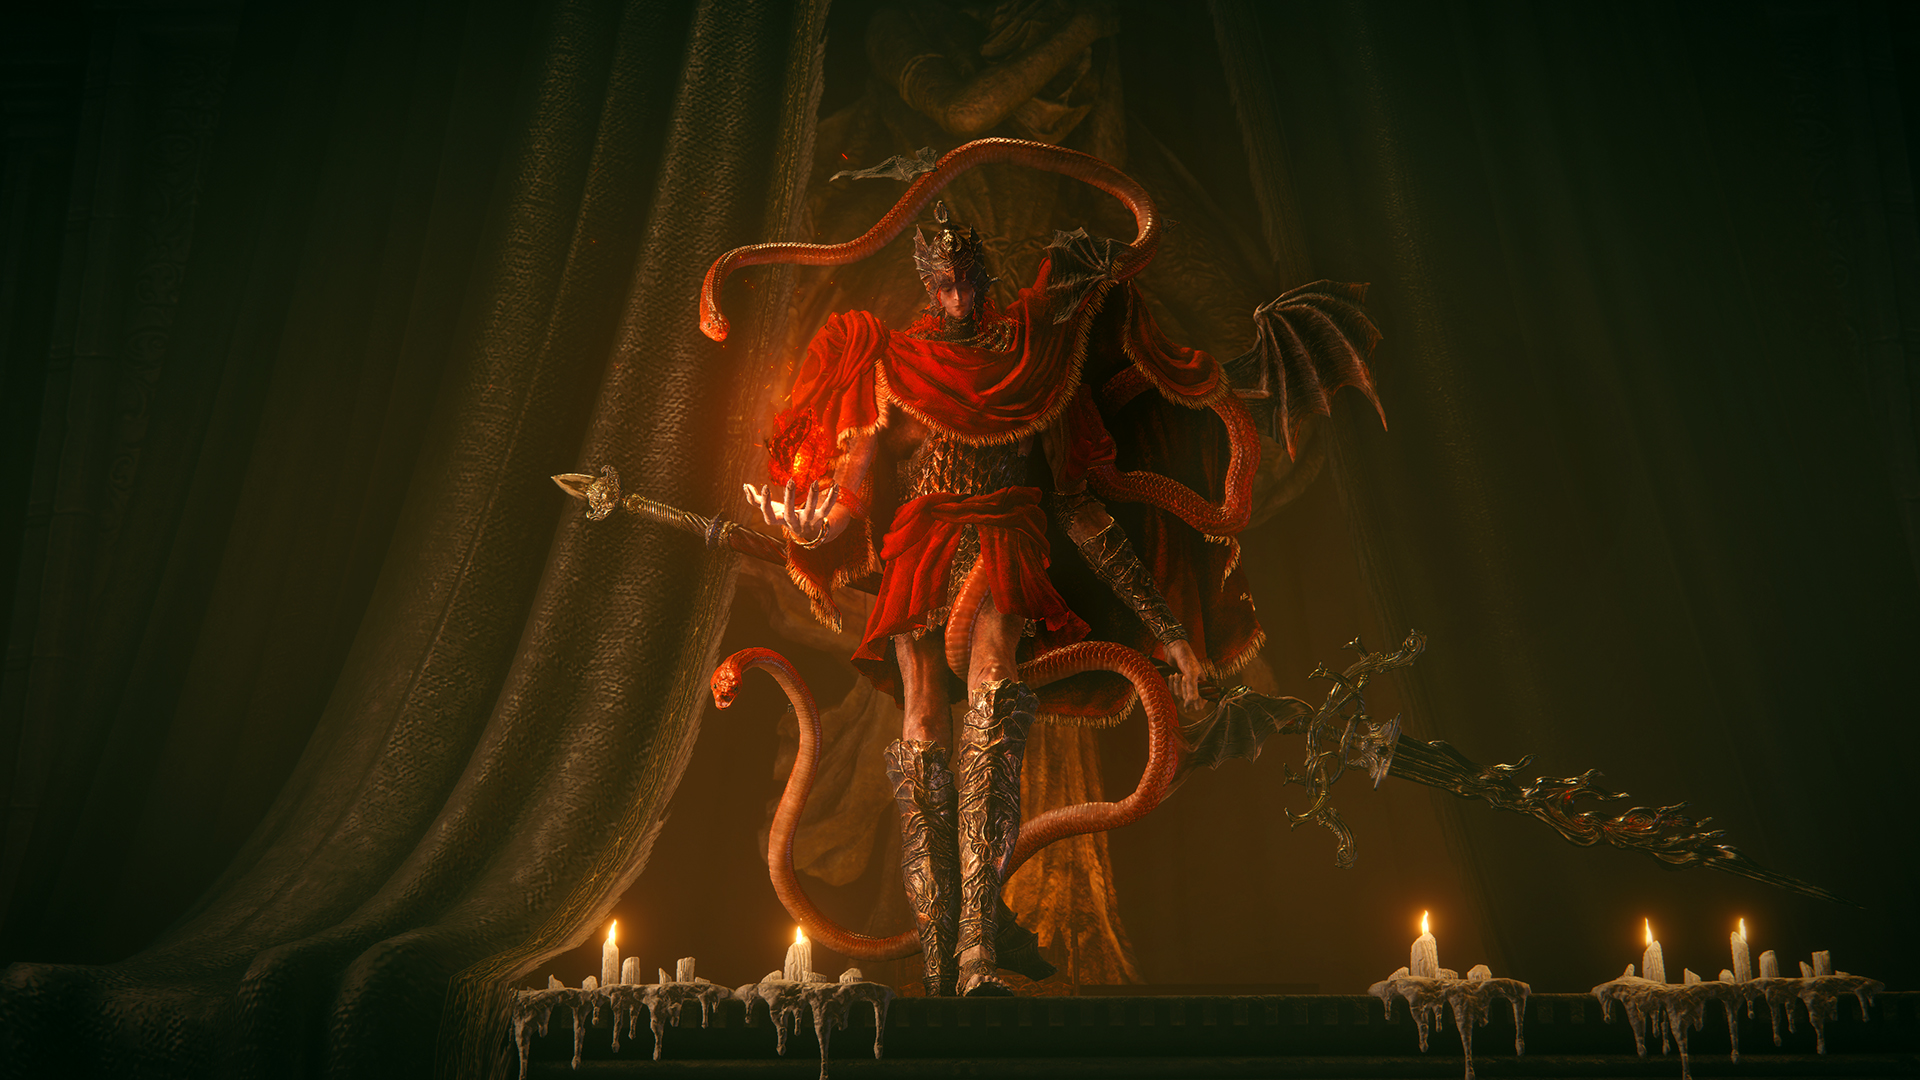 Messmer the Impaler from Elden Ring: Shadow of the Erdtree stands atop an altar covered in melted candle wax, holding a ball of flame in his hand and surrounded by snakes